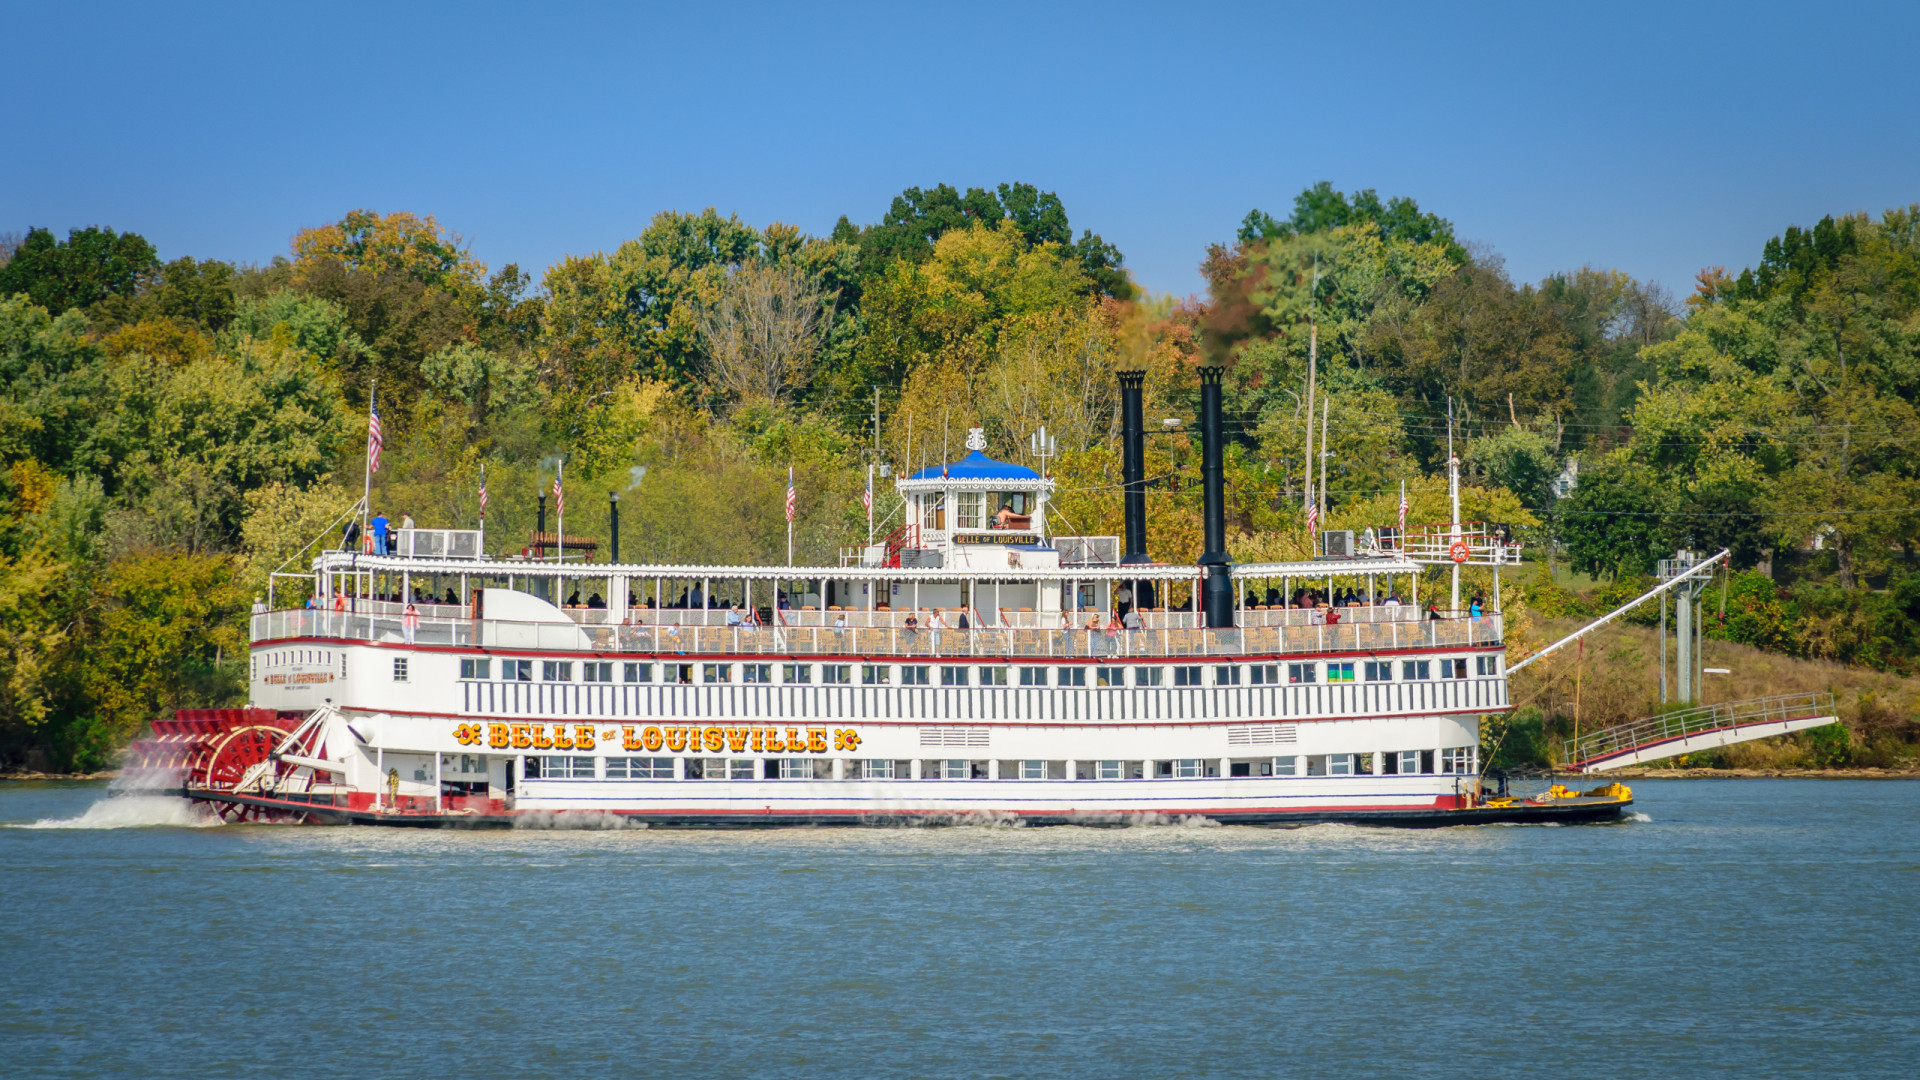 <p>The mighty Mississippi is served by a fleet of cruise ships operated by various companies, each offering different packages and cabin categories. Many operations are year-round experiences, with cities like Memphis, St. Louis, and New Orleans providing passengers with exciting excursion options.</p>